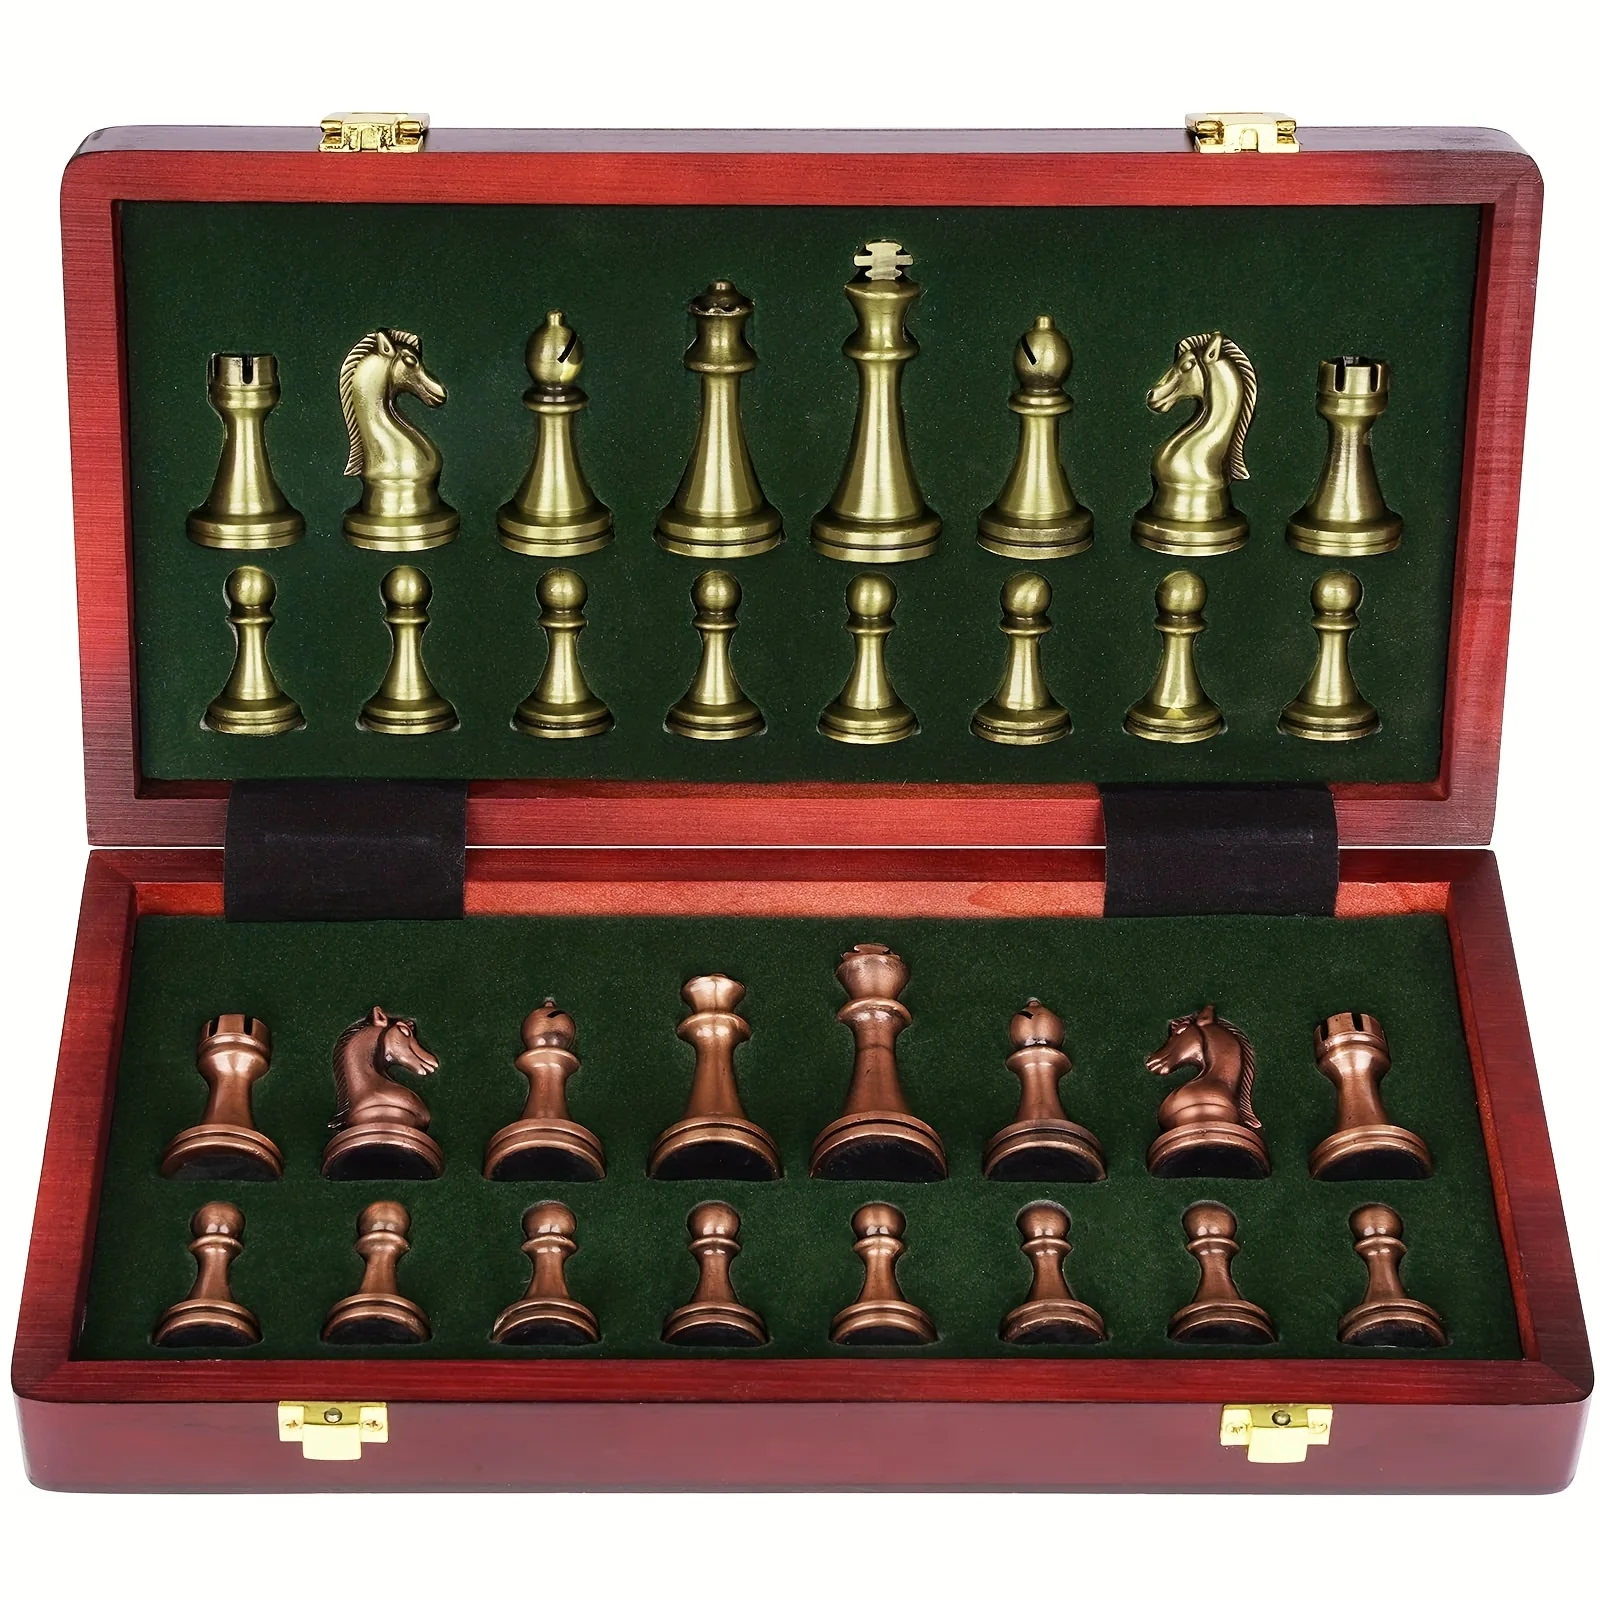 Large Metal Deluxe Chess Retro Copper Plated Alloy Chess Adult Set Board Game Portable Wooden Box Storage Folding Chess Set